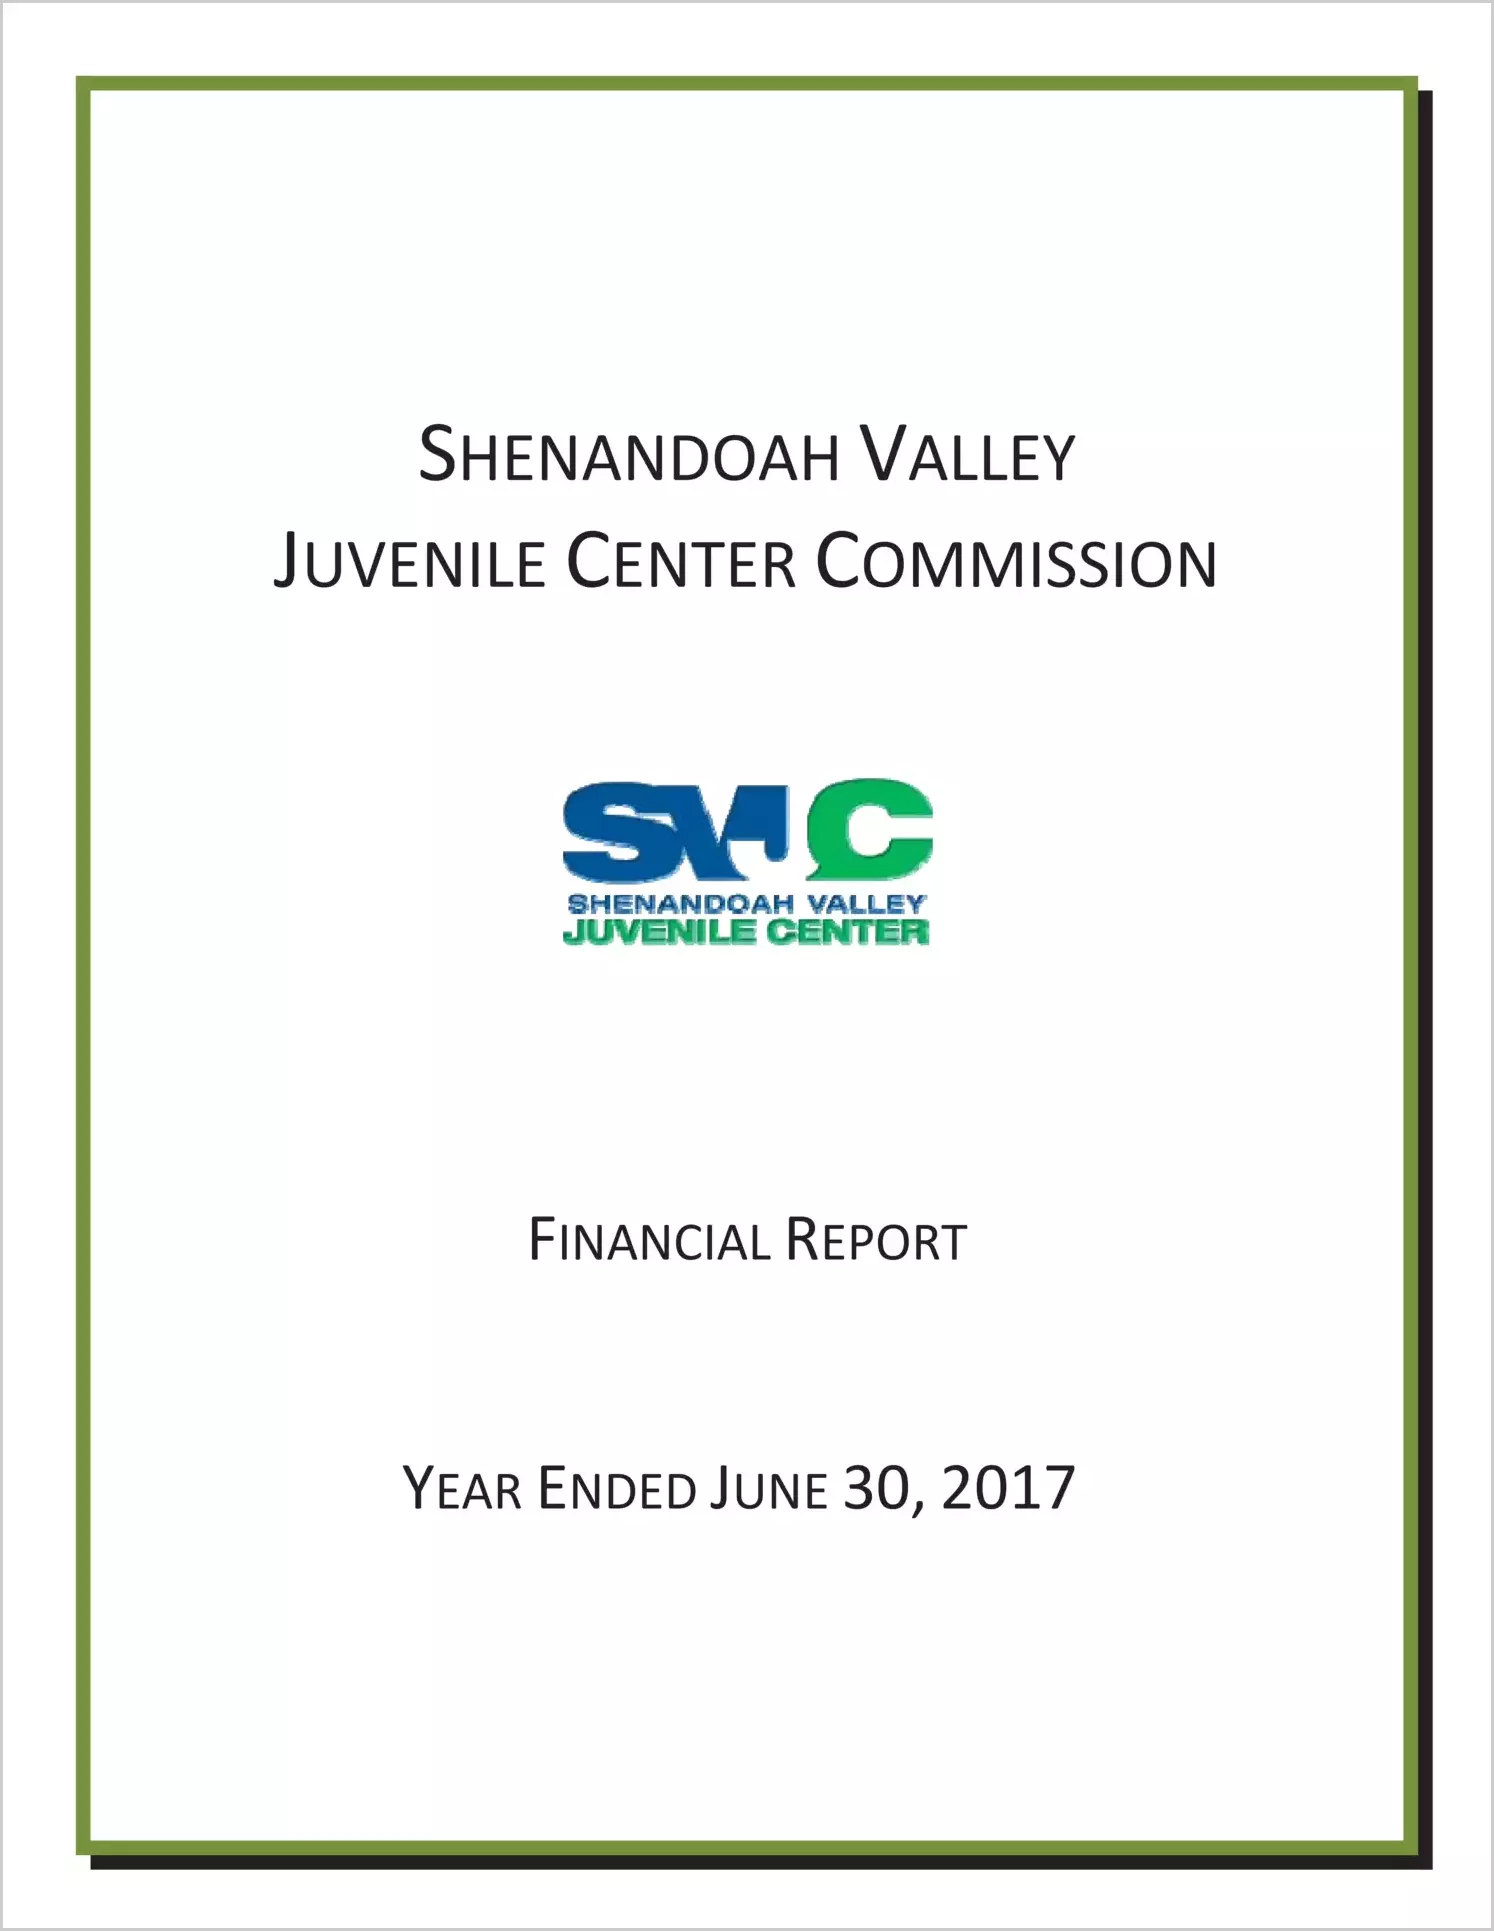 2017 ABC/Other Annual Financial Report  for Shenandoah Valley Juvenile Detention Home Commission